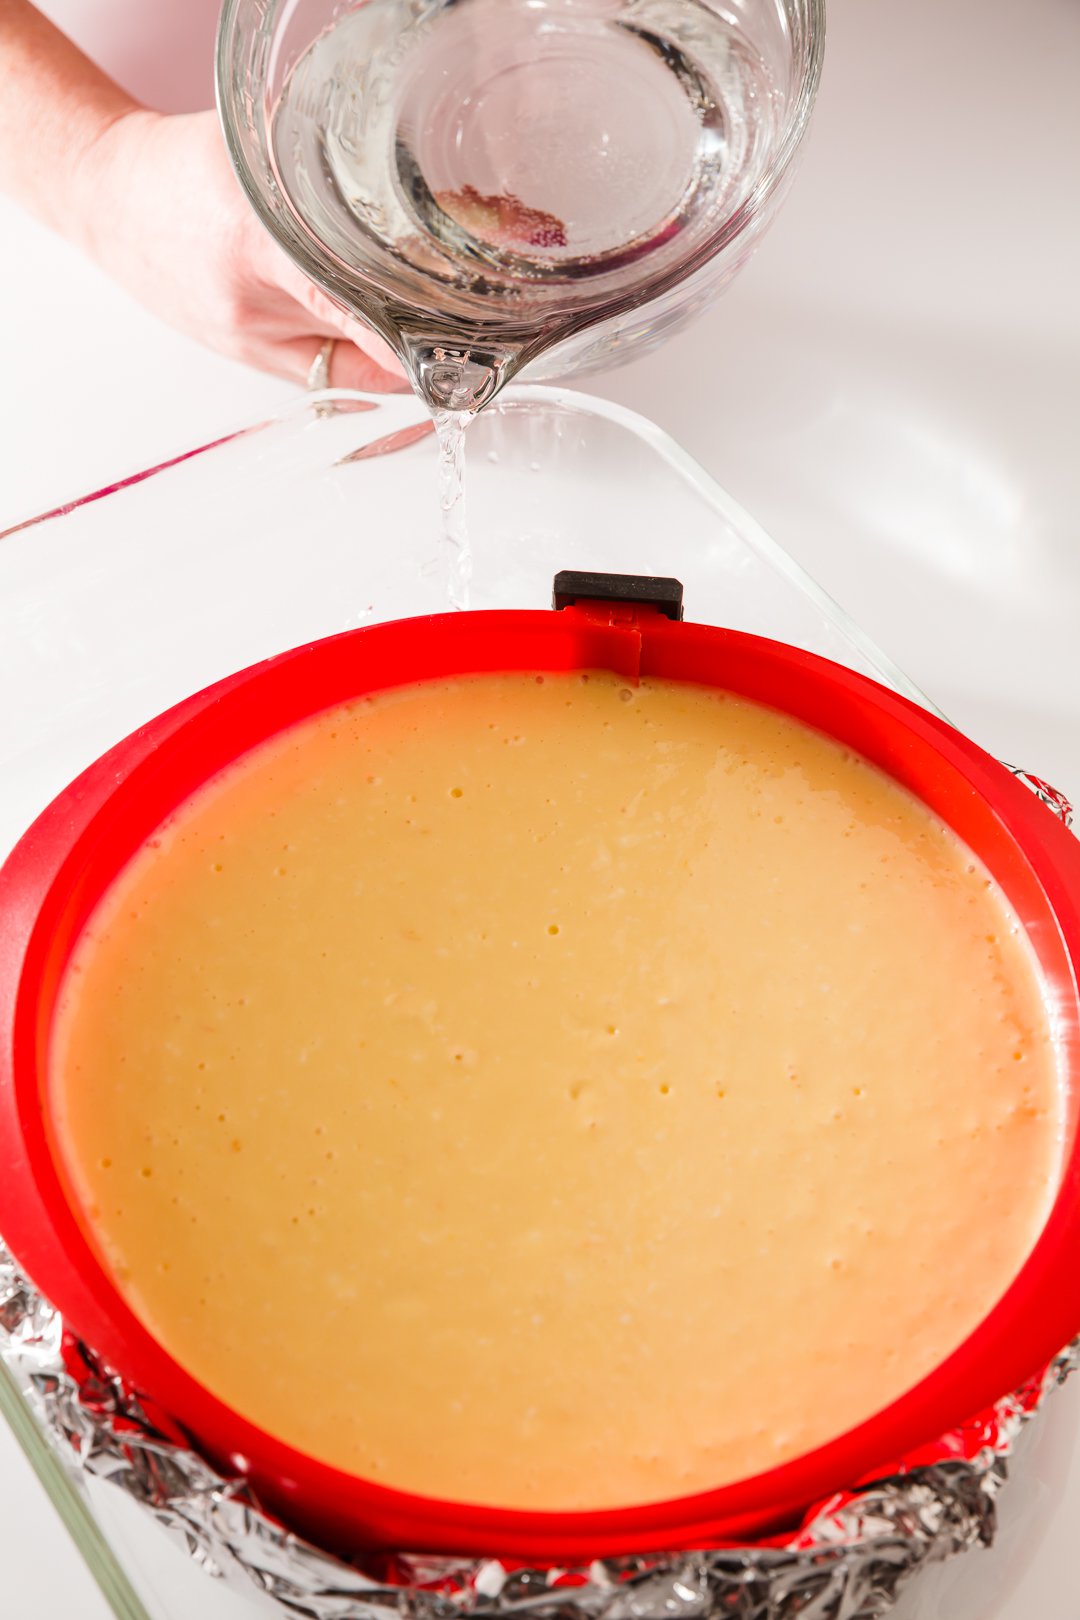 Orange cheesecake in baking dish with hot water being added